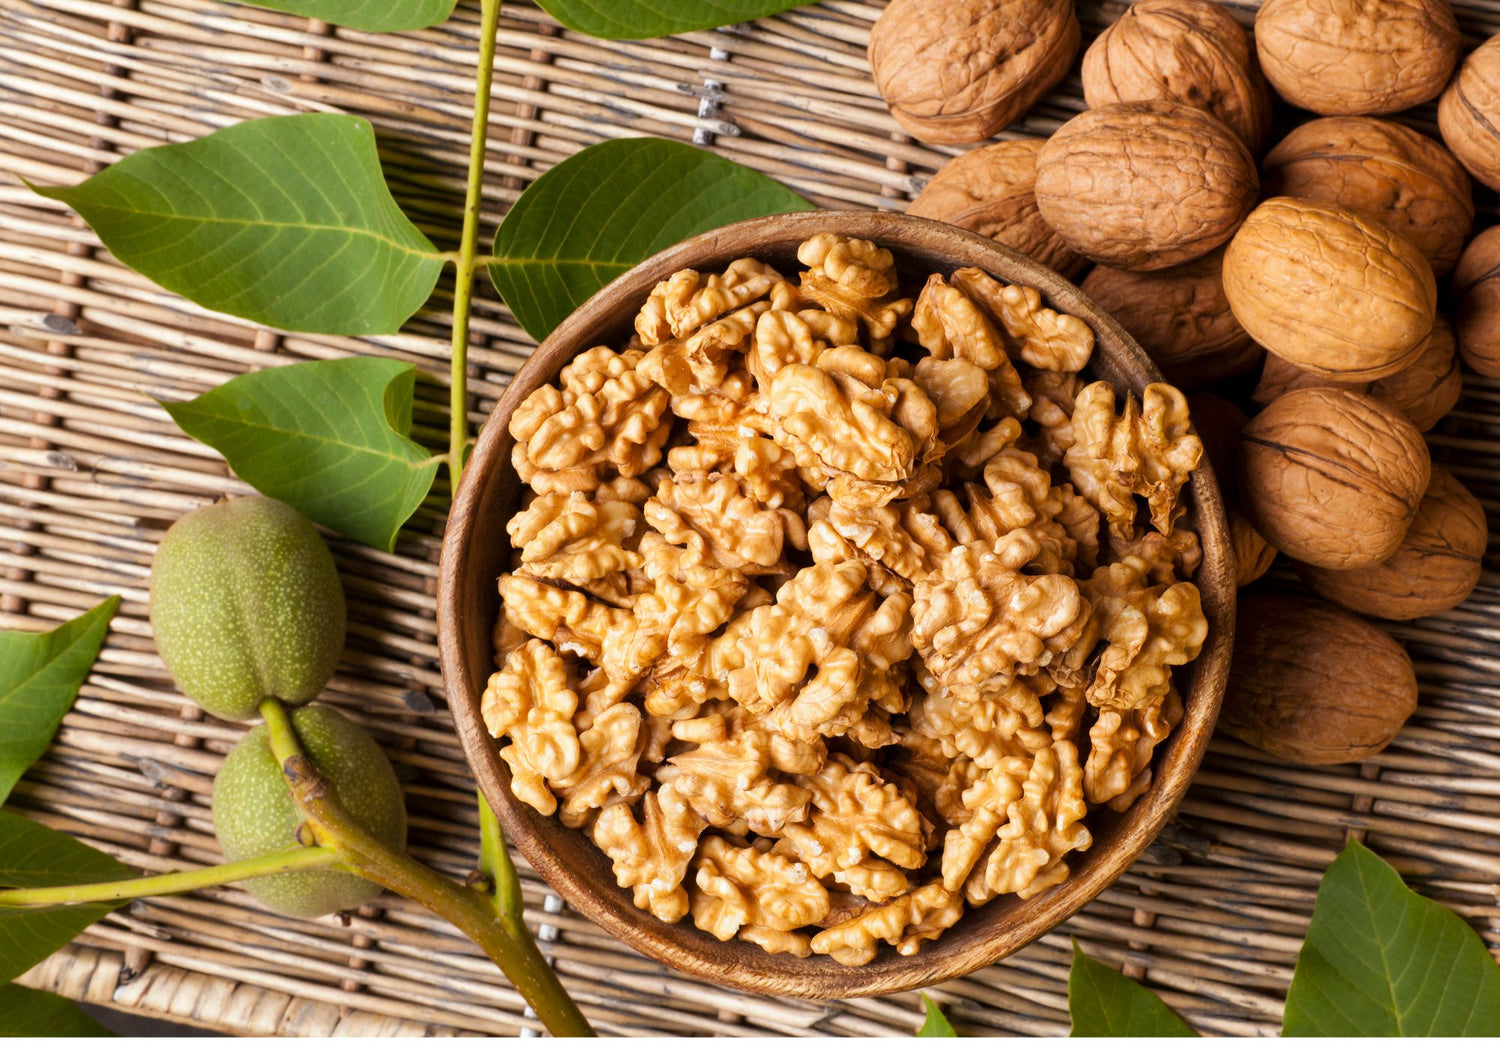 The Wonder of Walnuts: Why You Should Embrace this Nutty Superfood